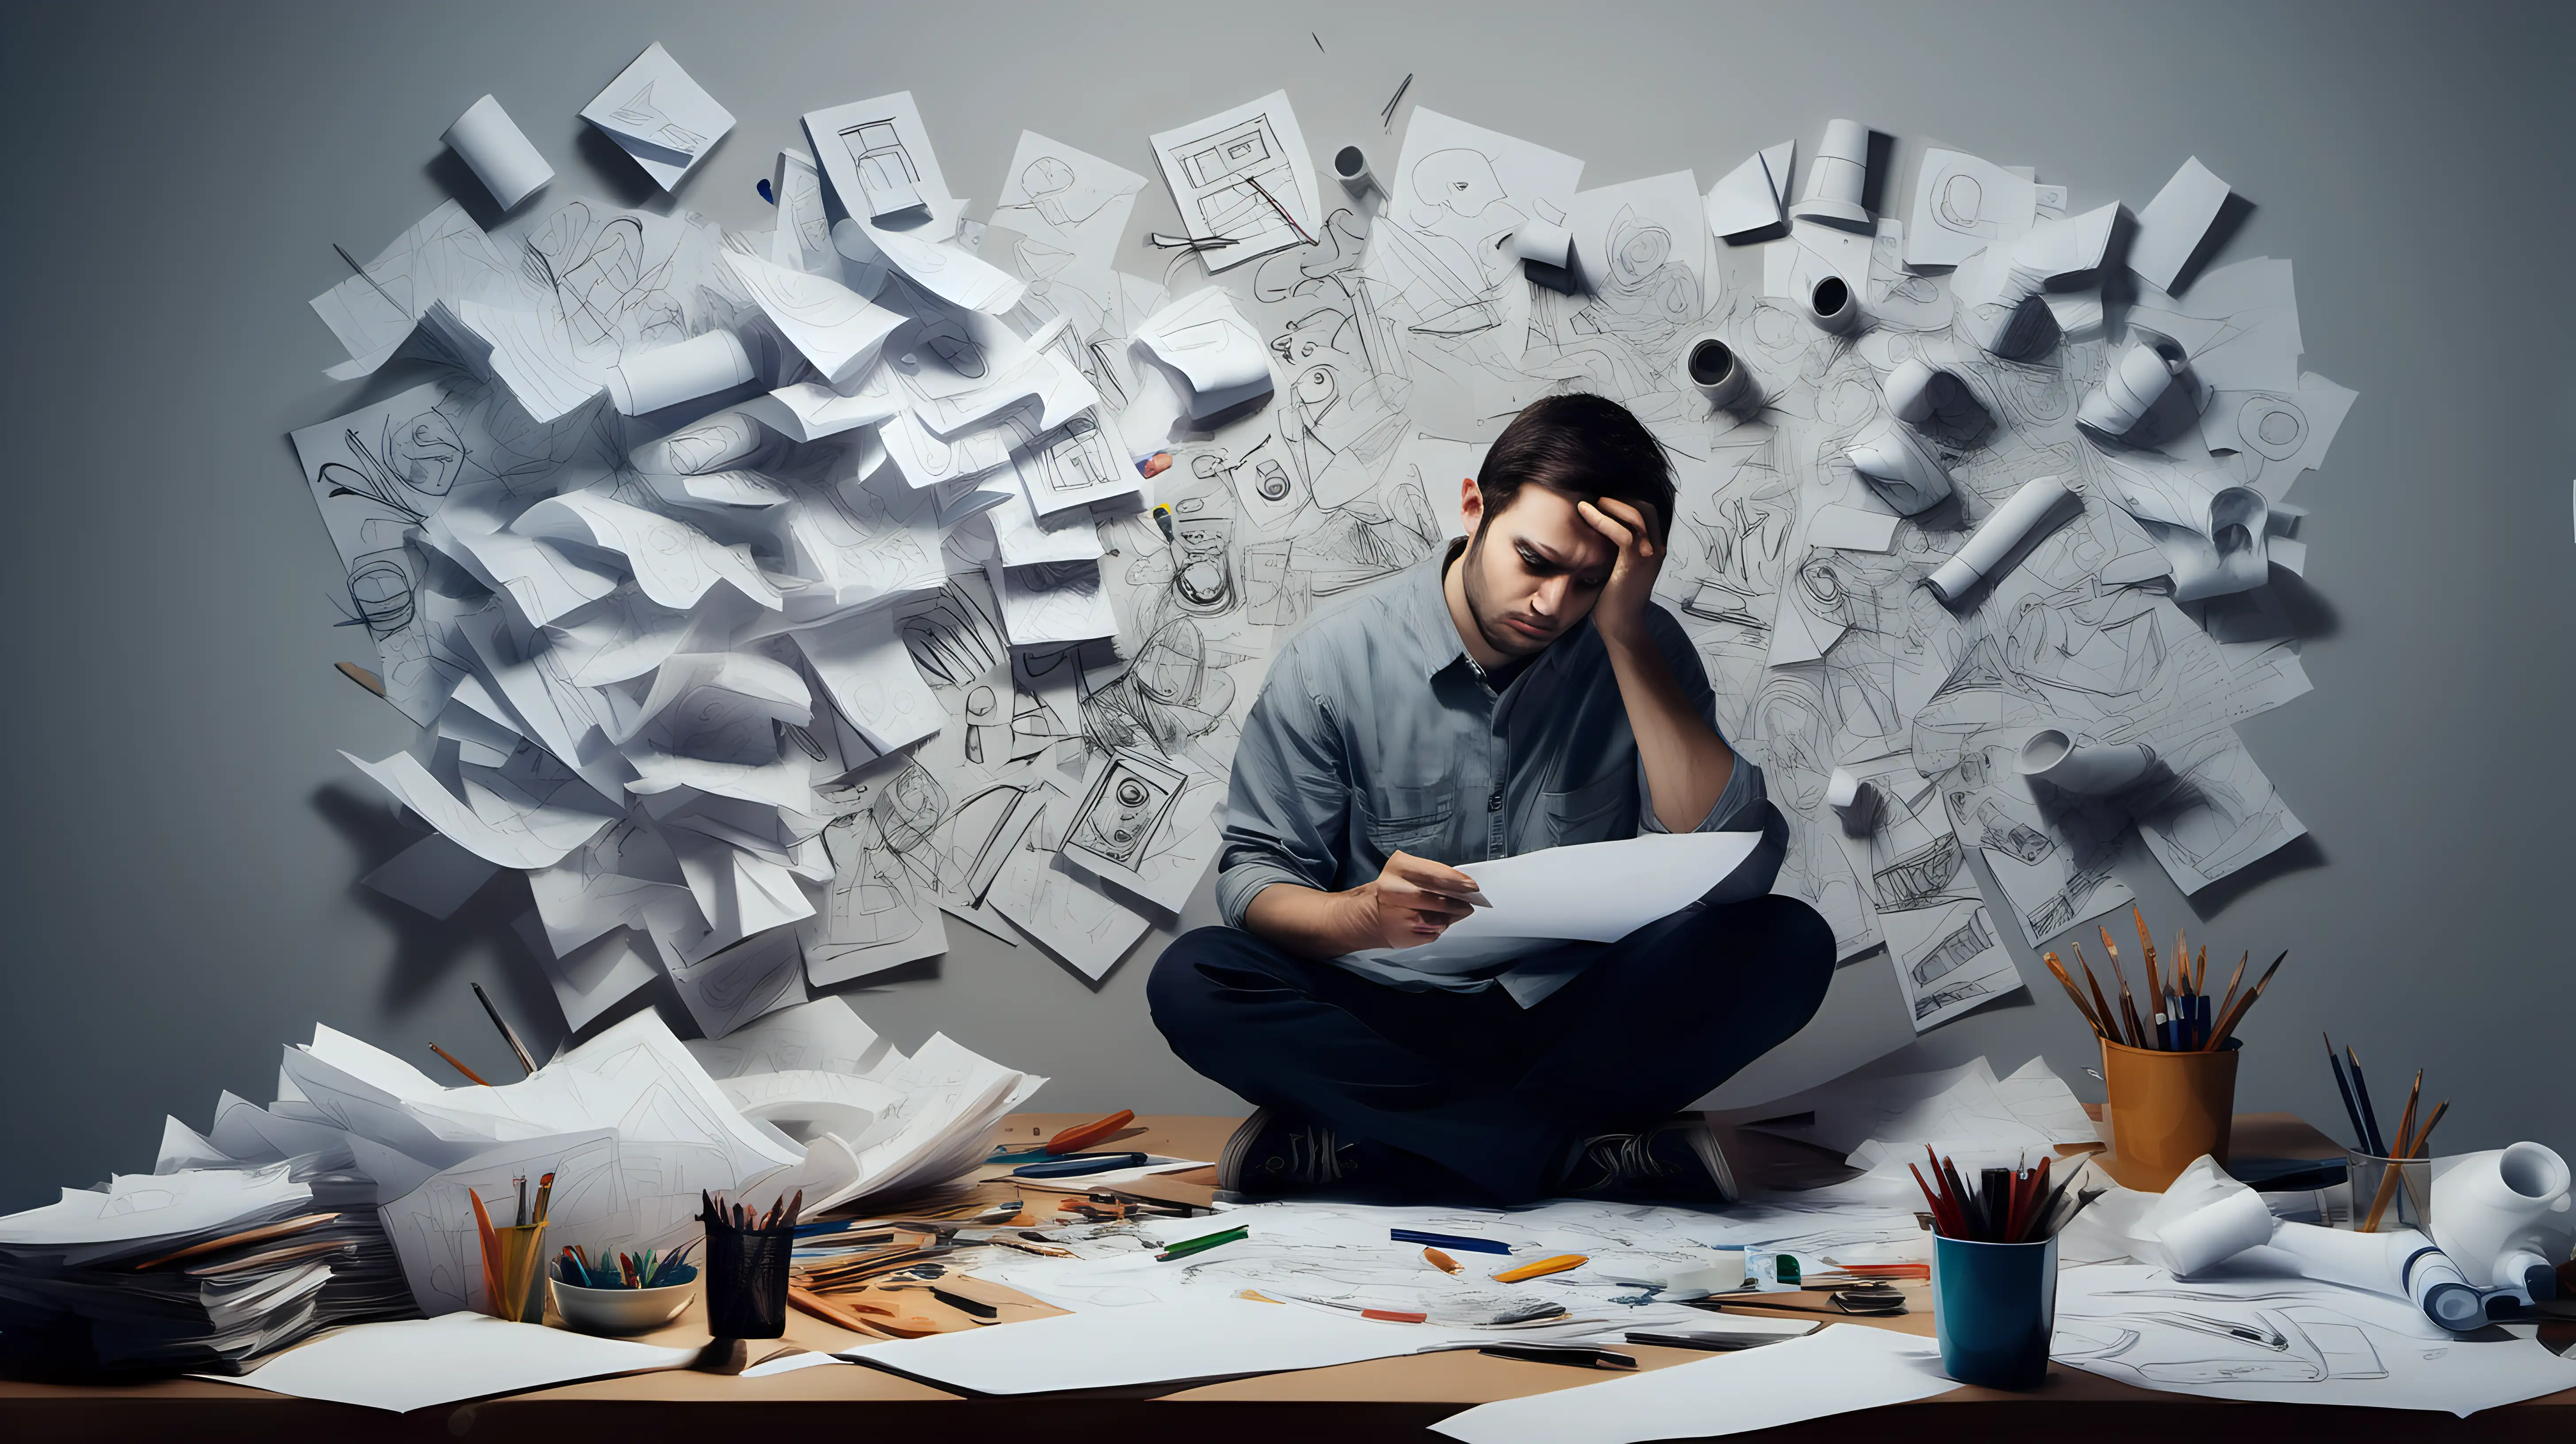 Illustrate a person working on a creative project, surrounded by drafts and discarded ideas, their fatigued expression reflecting the emotional toll of artistic pursuit and perfectionism.